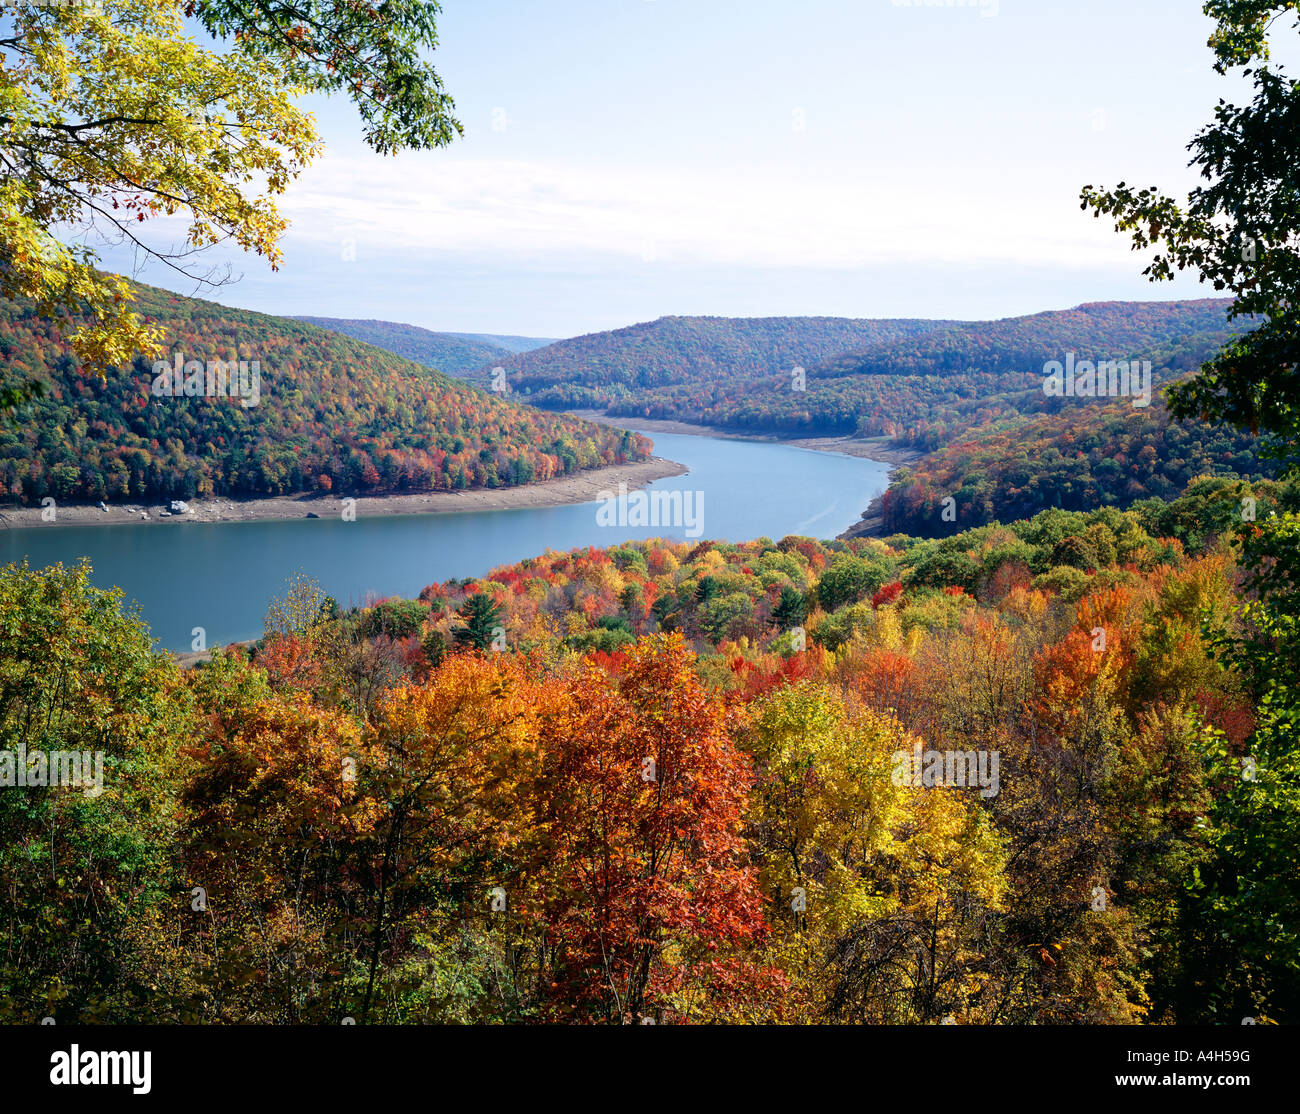 Kinzua Bay Viewed From Longhouse Scenic Drive, Allegheny Reservoir, Allegheny National Forest, Pennsylvania, Usa, Stock Photo